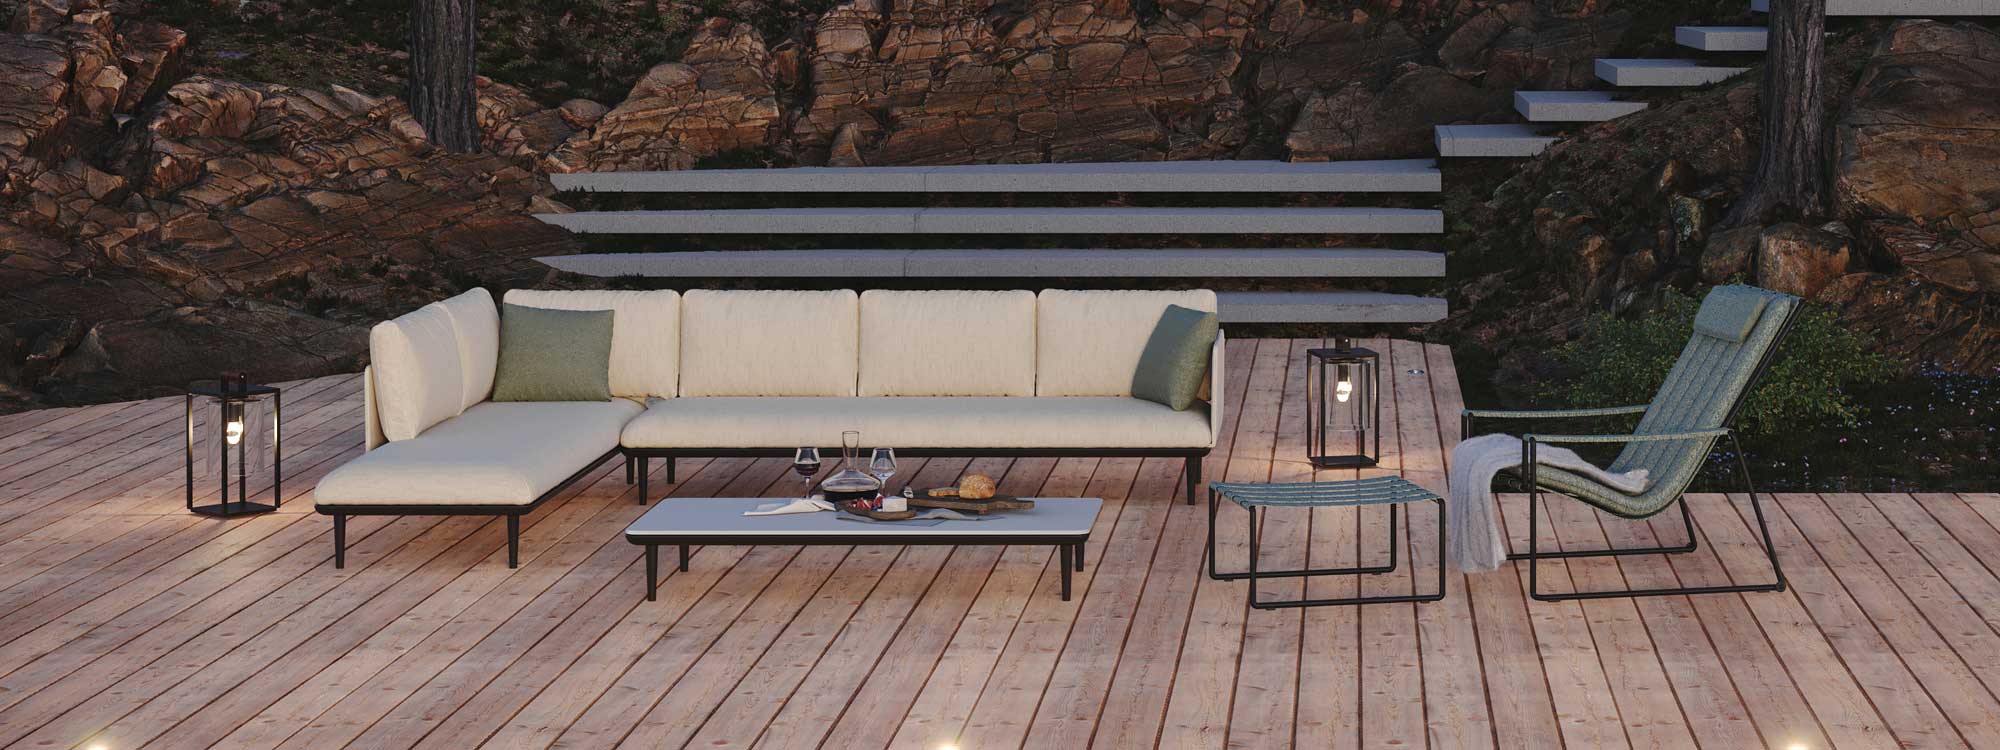 Styletto outdoor low tables & exterior side tables incl. 3.2 M large garden low table with refined exterior low table style by Royal Botania